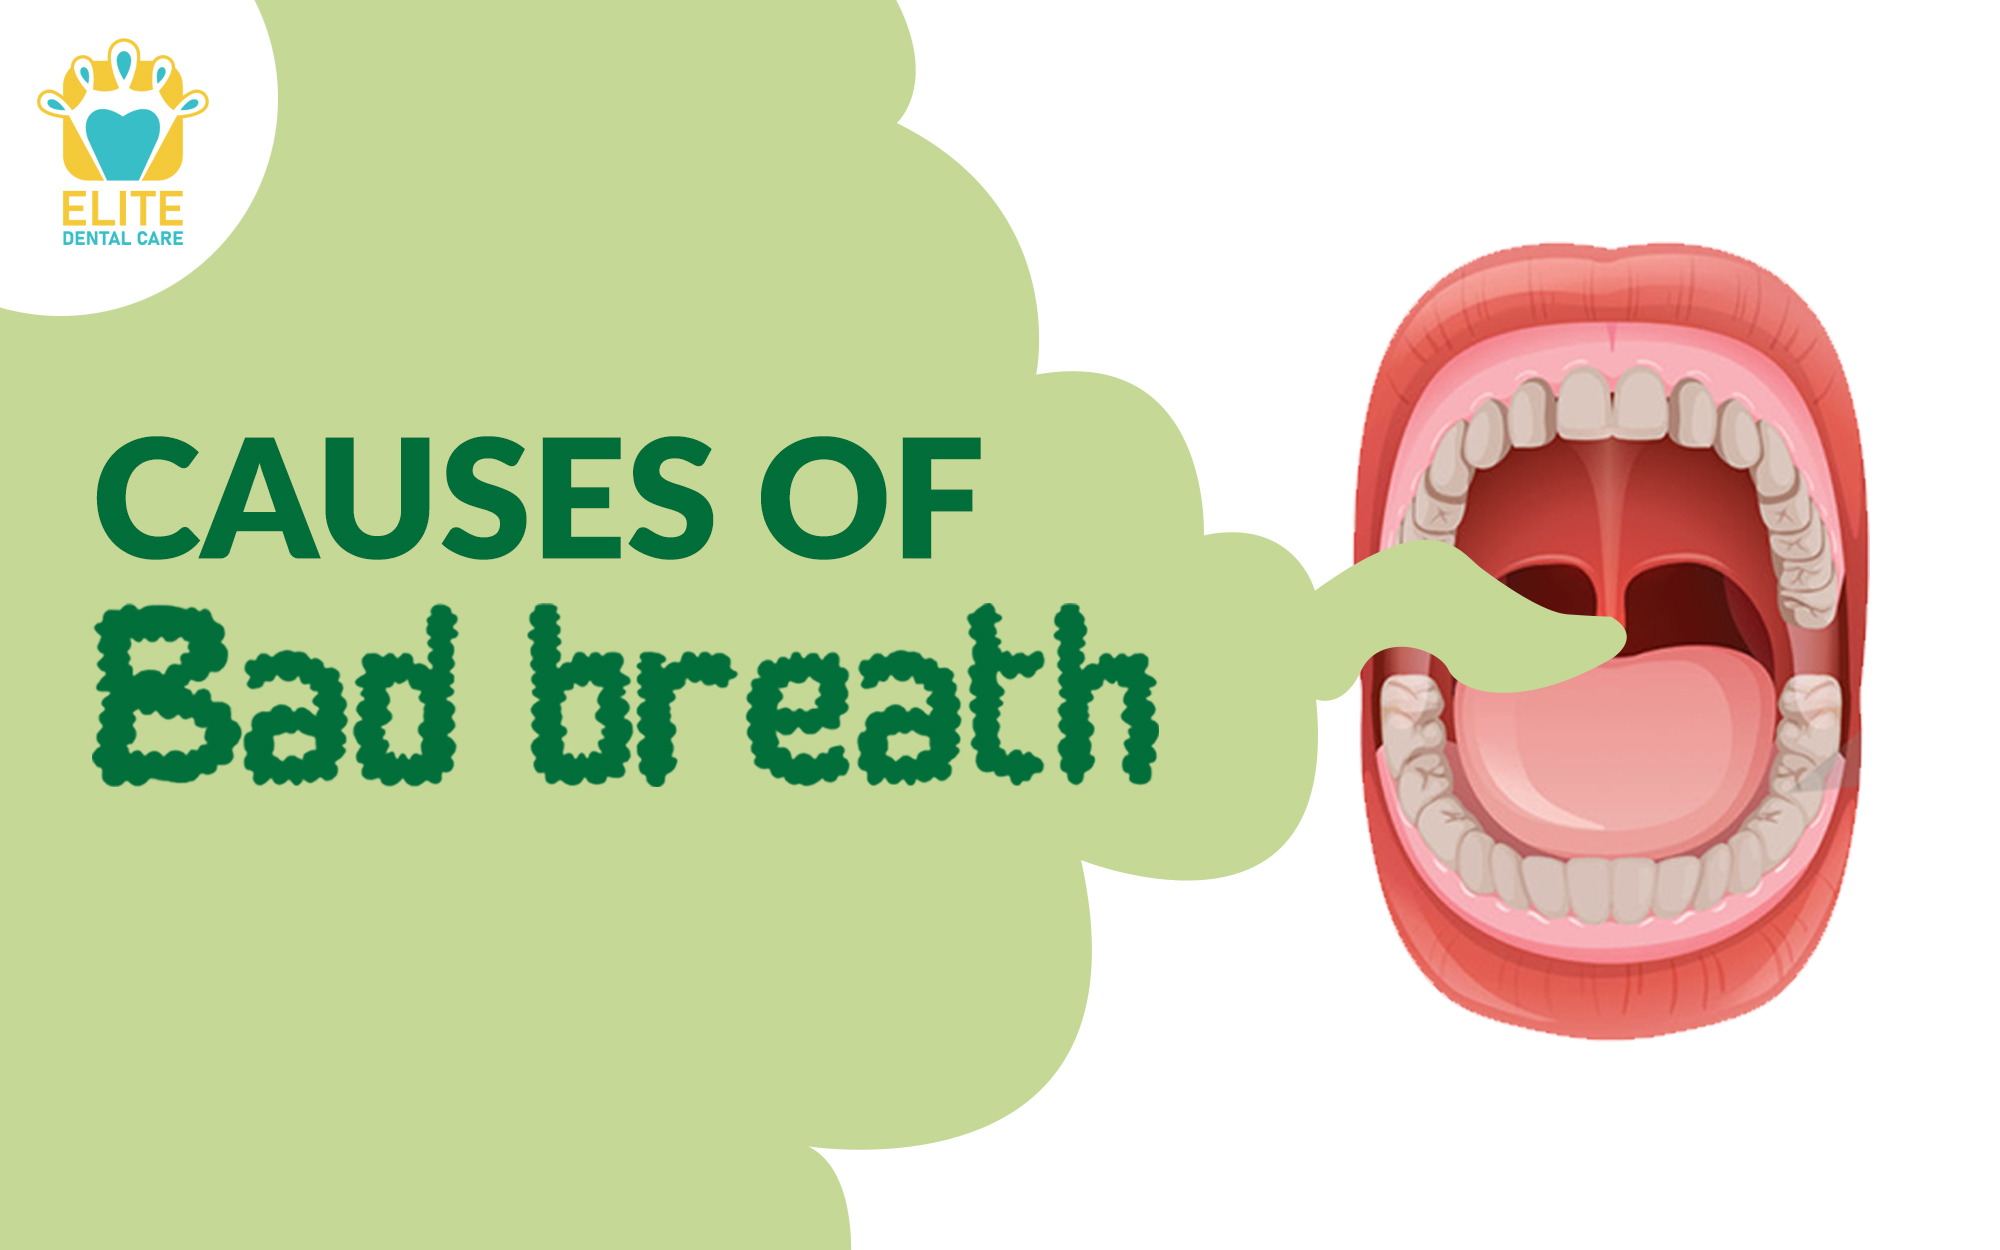 What are the Main Causes of Bad Breath?